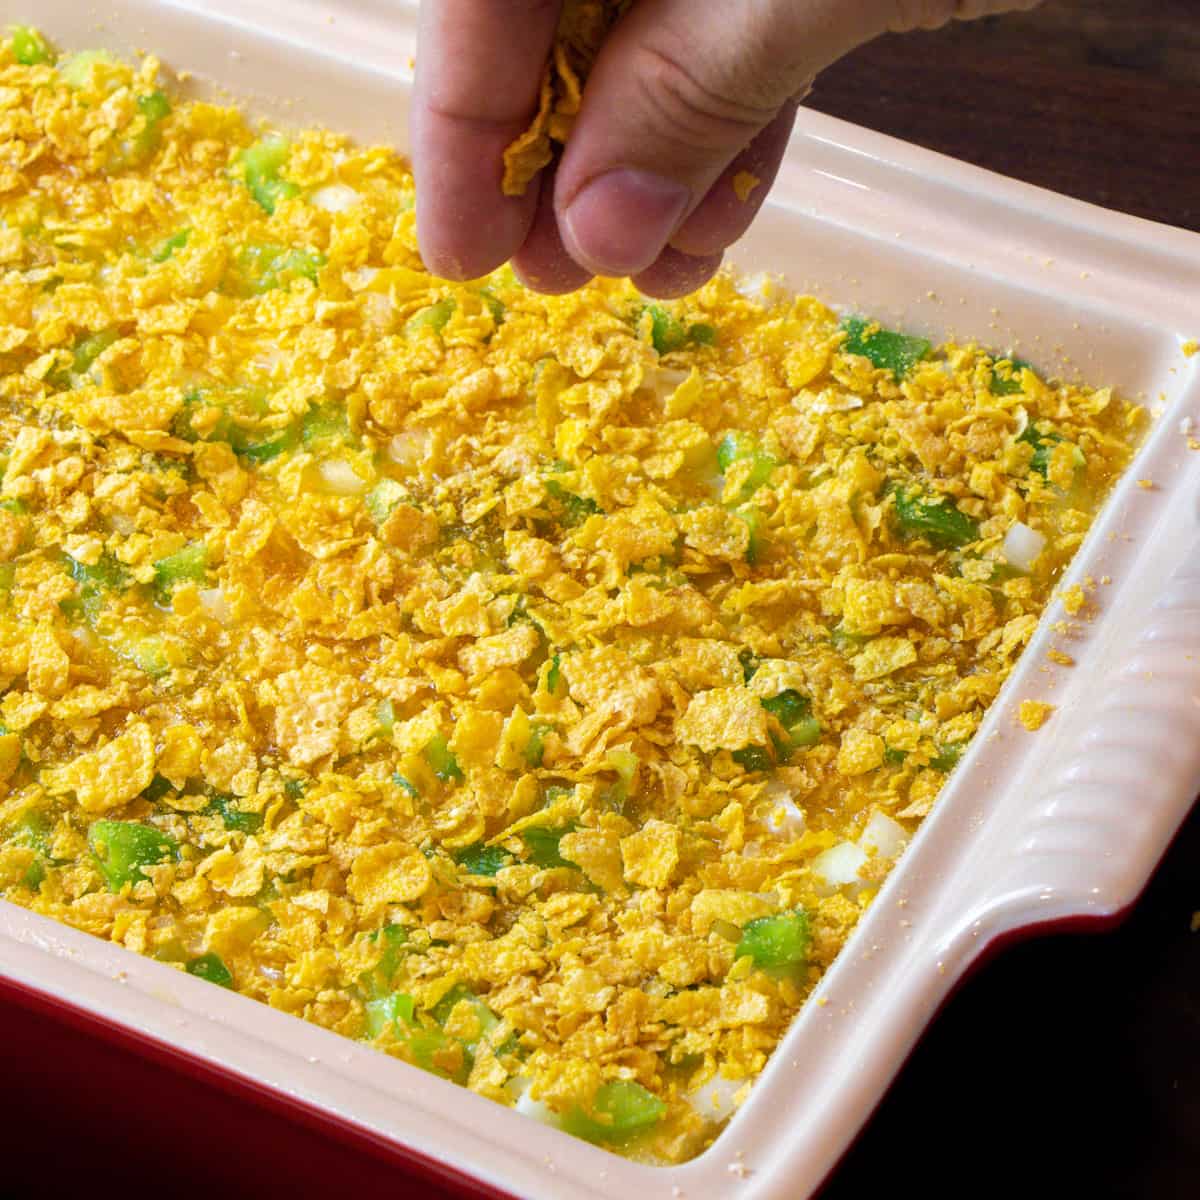 Sprinkling cereal on top of the casserole.